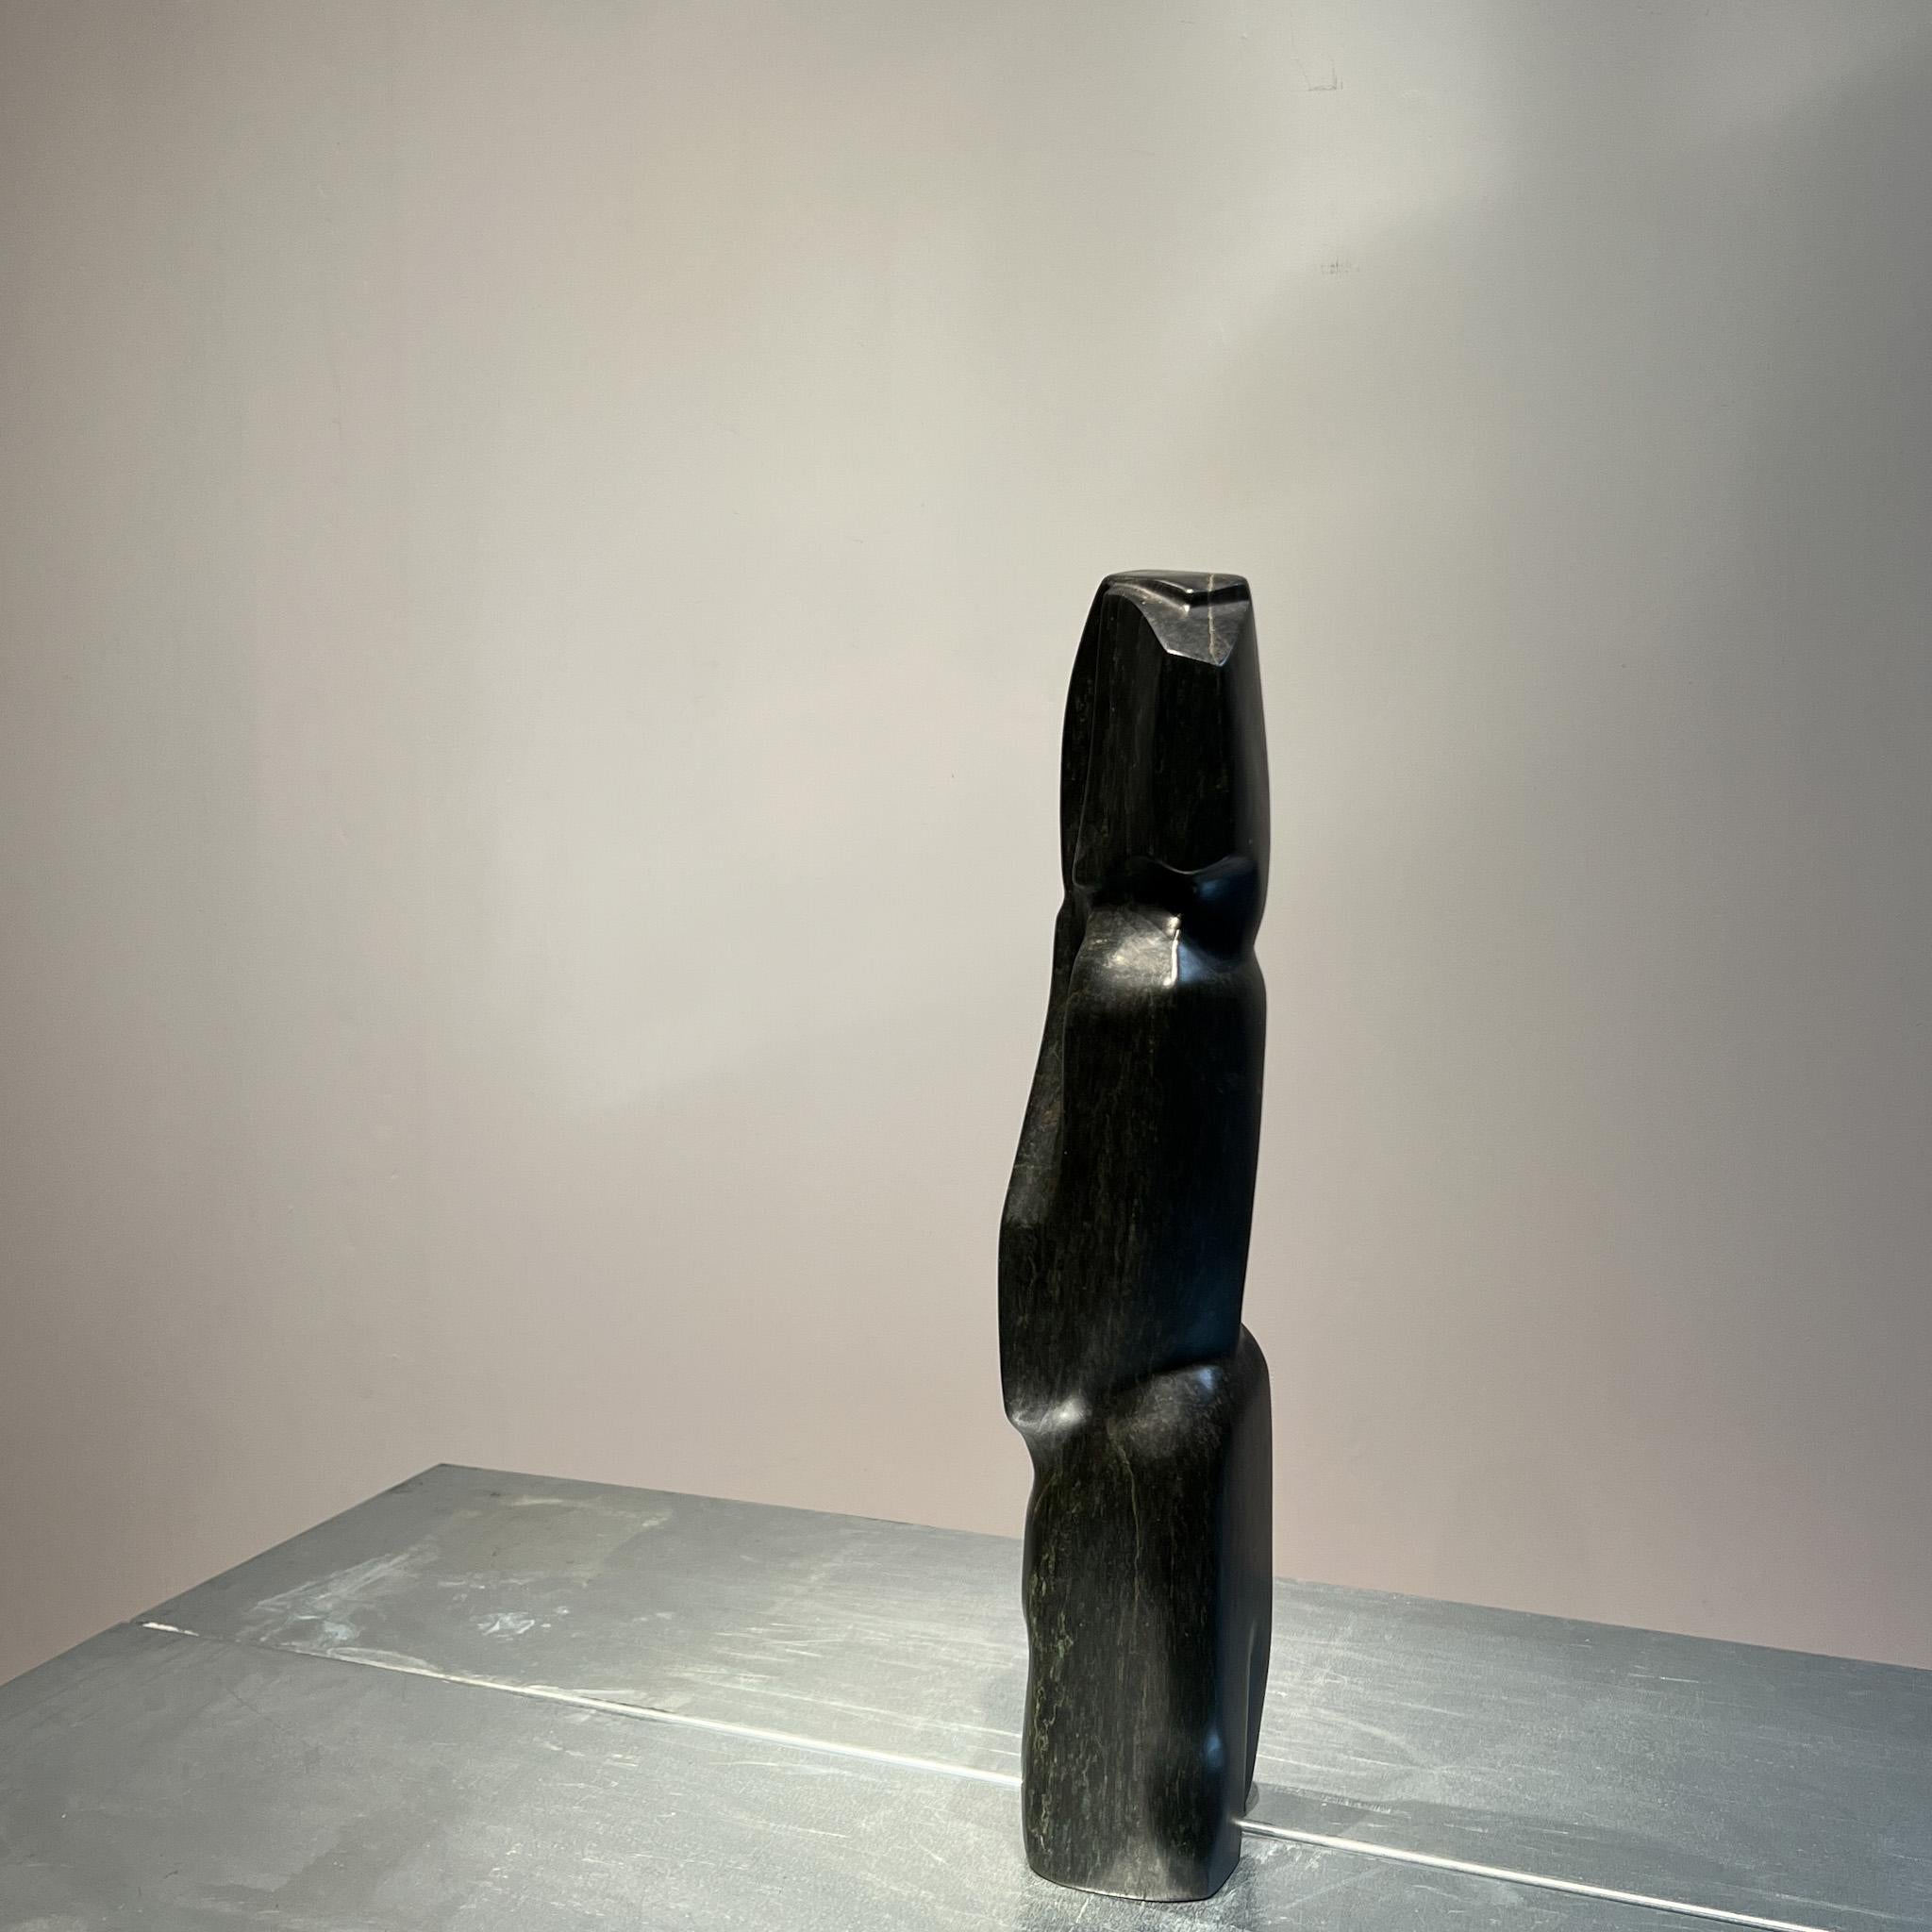 Large black stone sculpture of a figure in expressionist / brutalist style,
This sculpture  smooth hand carved textures emphasizes the strong abstract shapes of a human figure.

This sculpture with its rounded shapes, creating compositions that